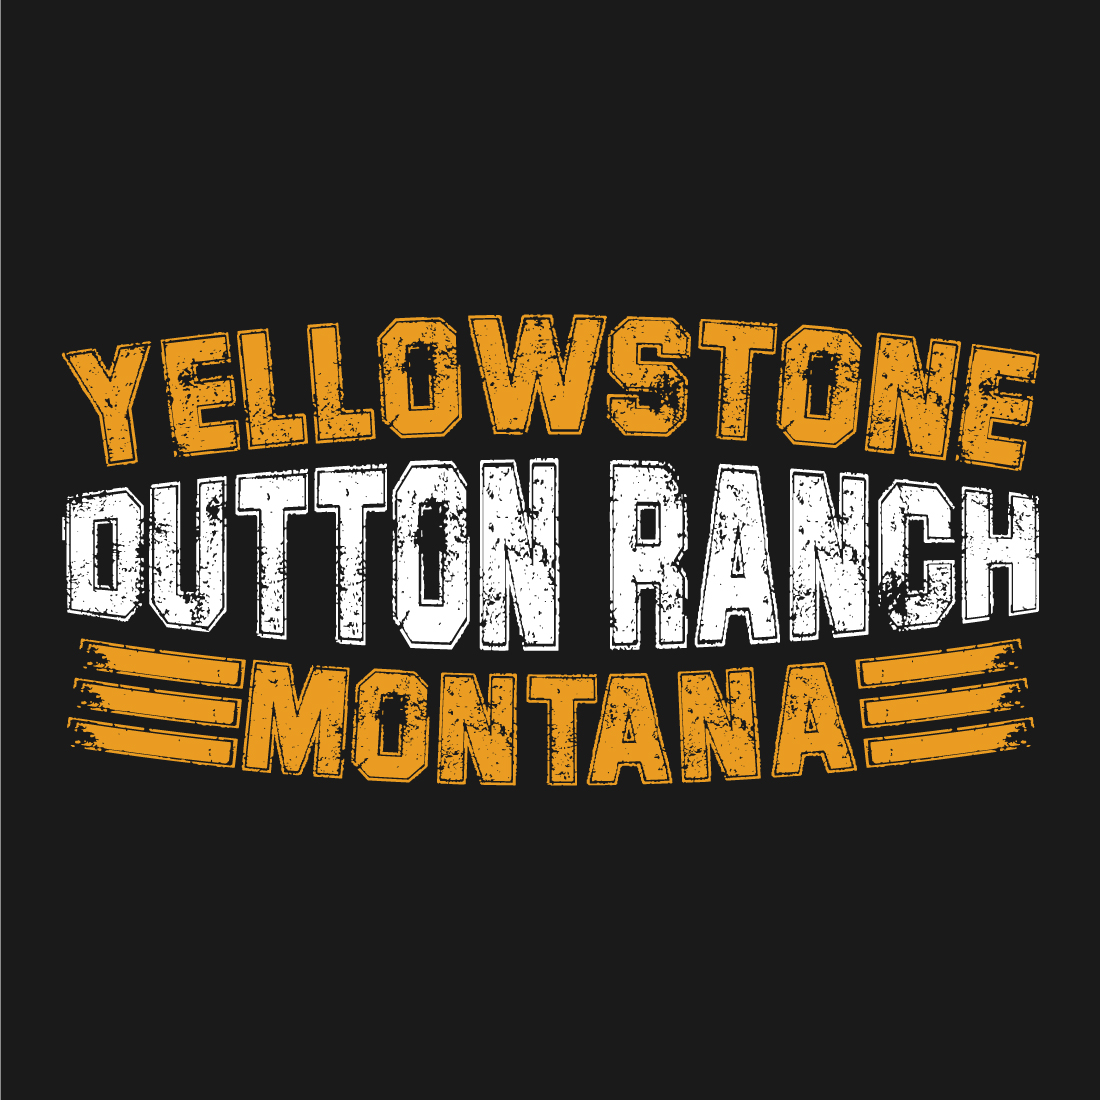 Image with colorful lettering for yellowstone dutton ranch montana prints.